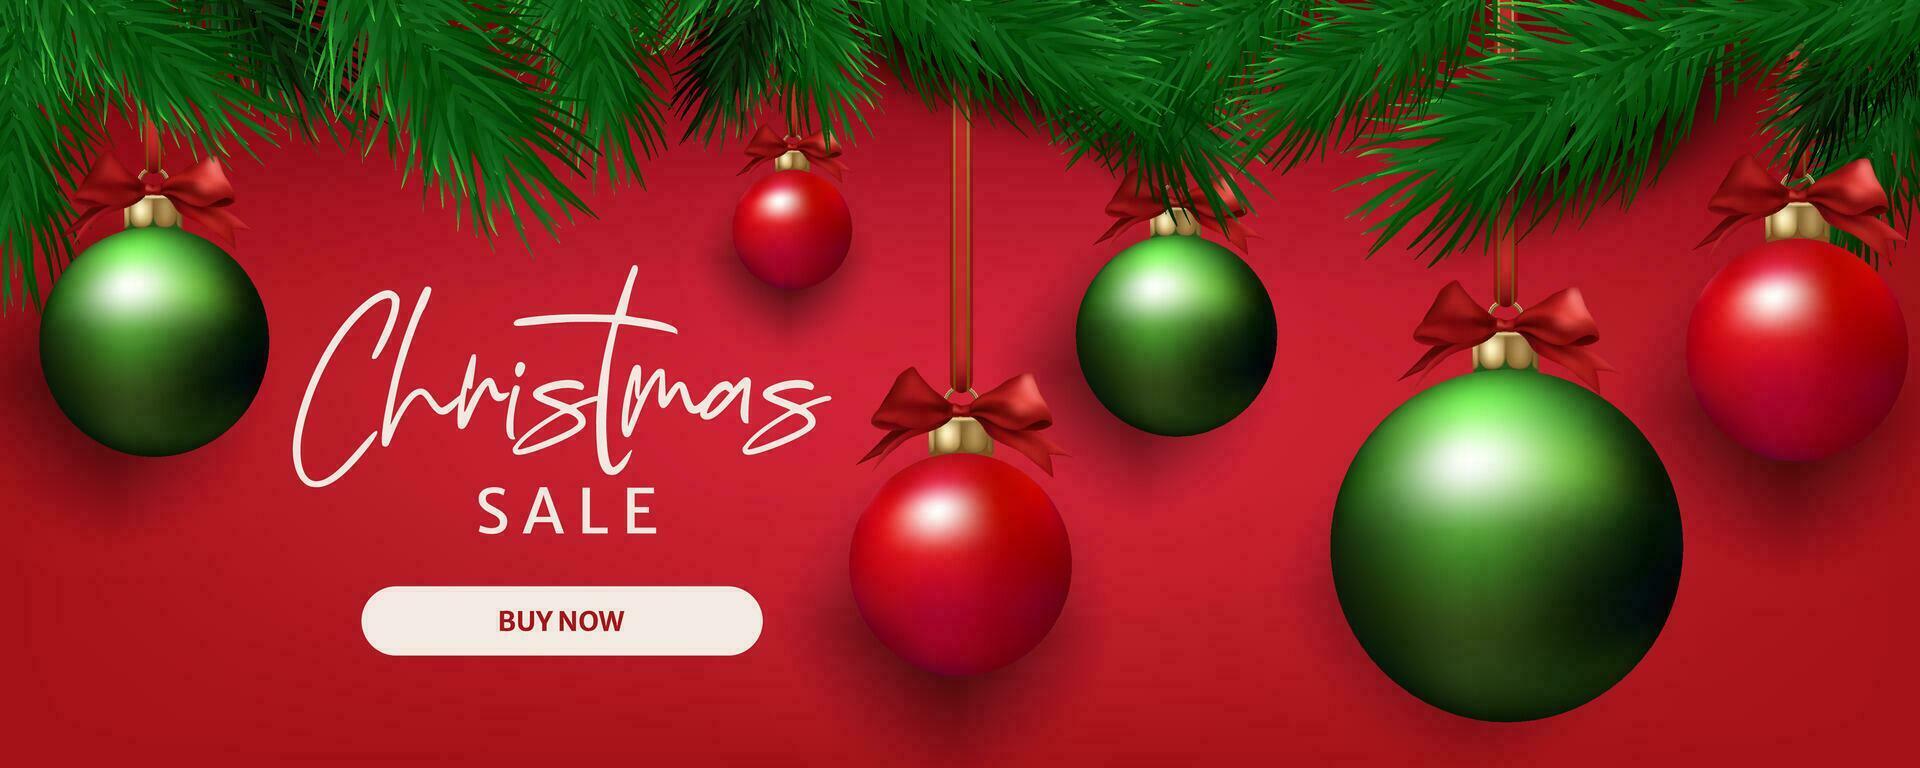 Christmas sale banner realistic pine tree branches and decorative balls. Festive background for winter celebrations, with a mix of red and green elements. Not AI generated. vector